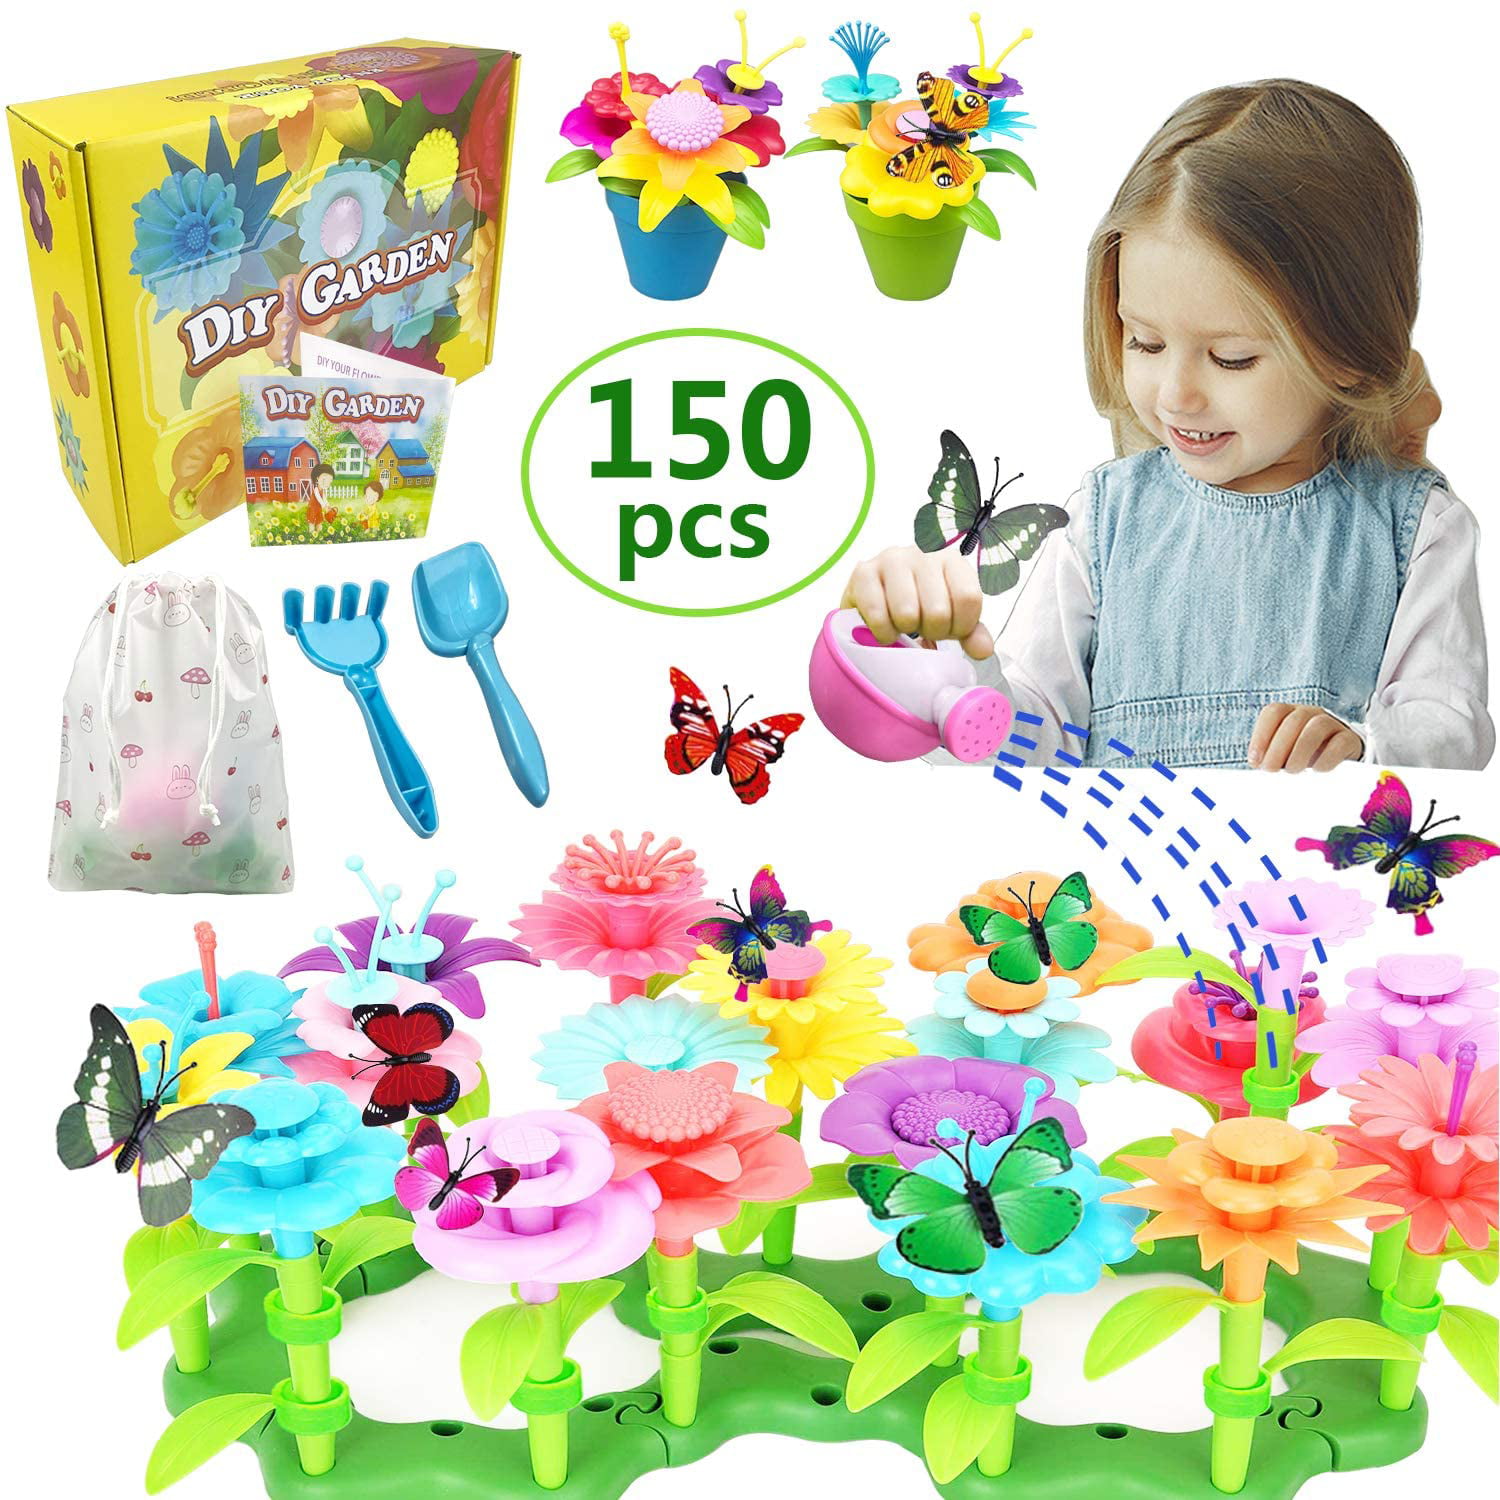 Desire Deluxe Girls Toys for 3 Year Old Kids Flower Build A Garden Toy Building 